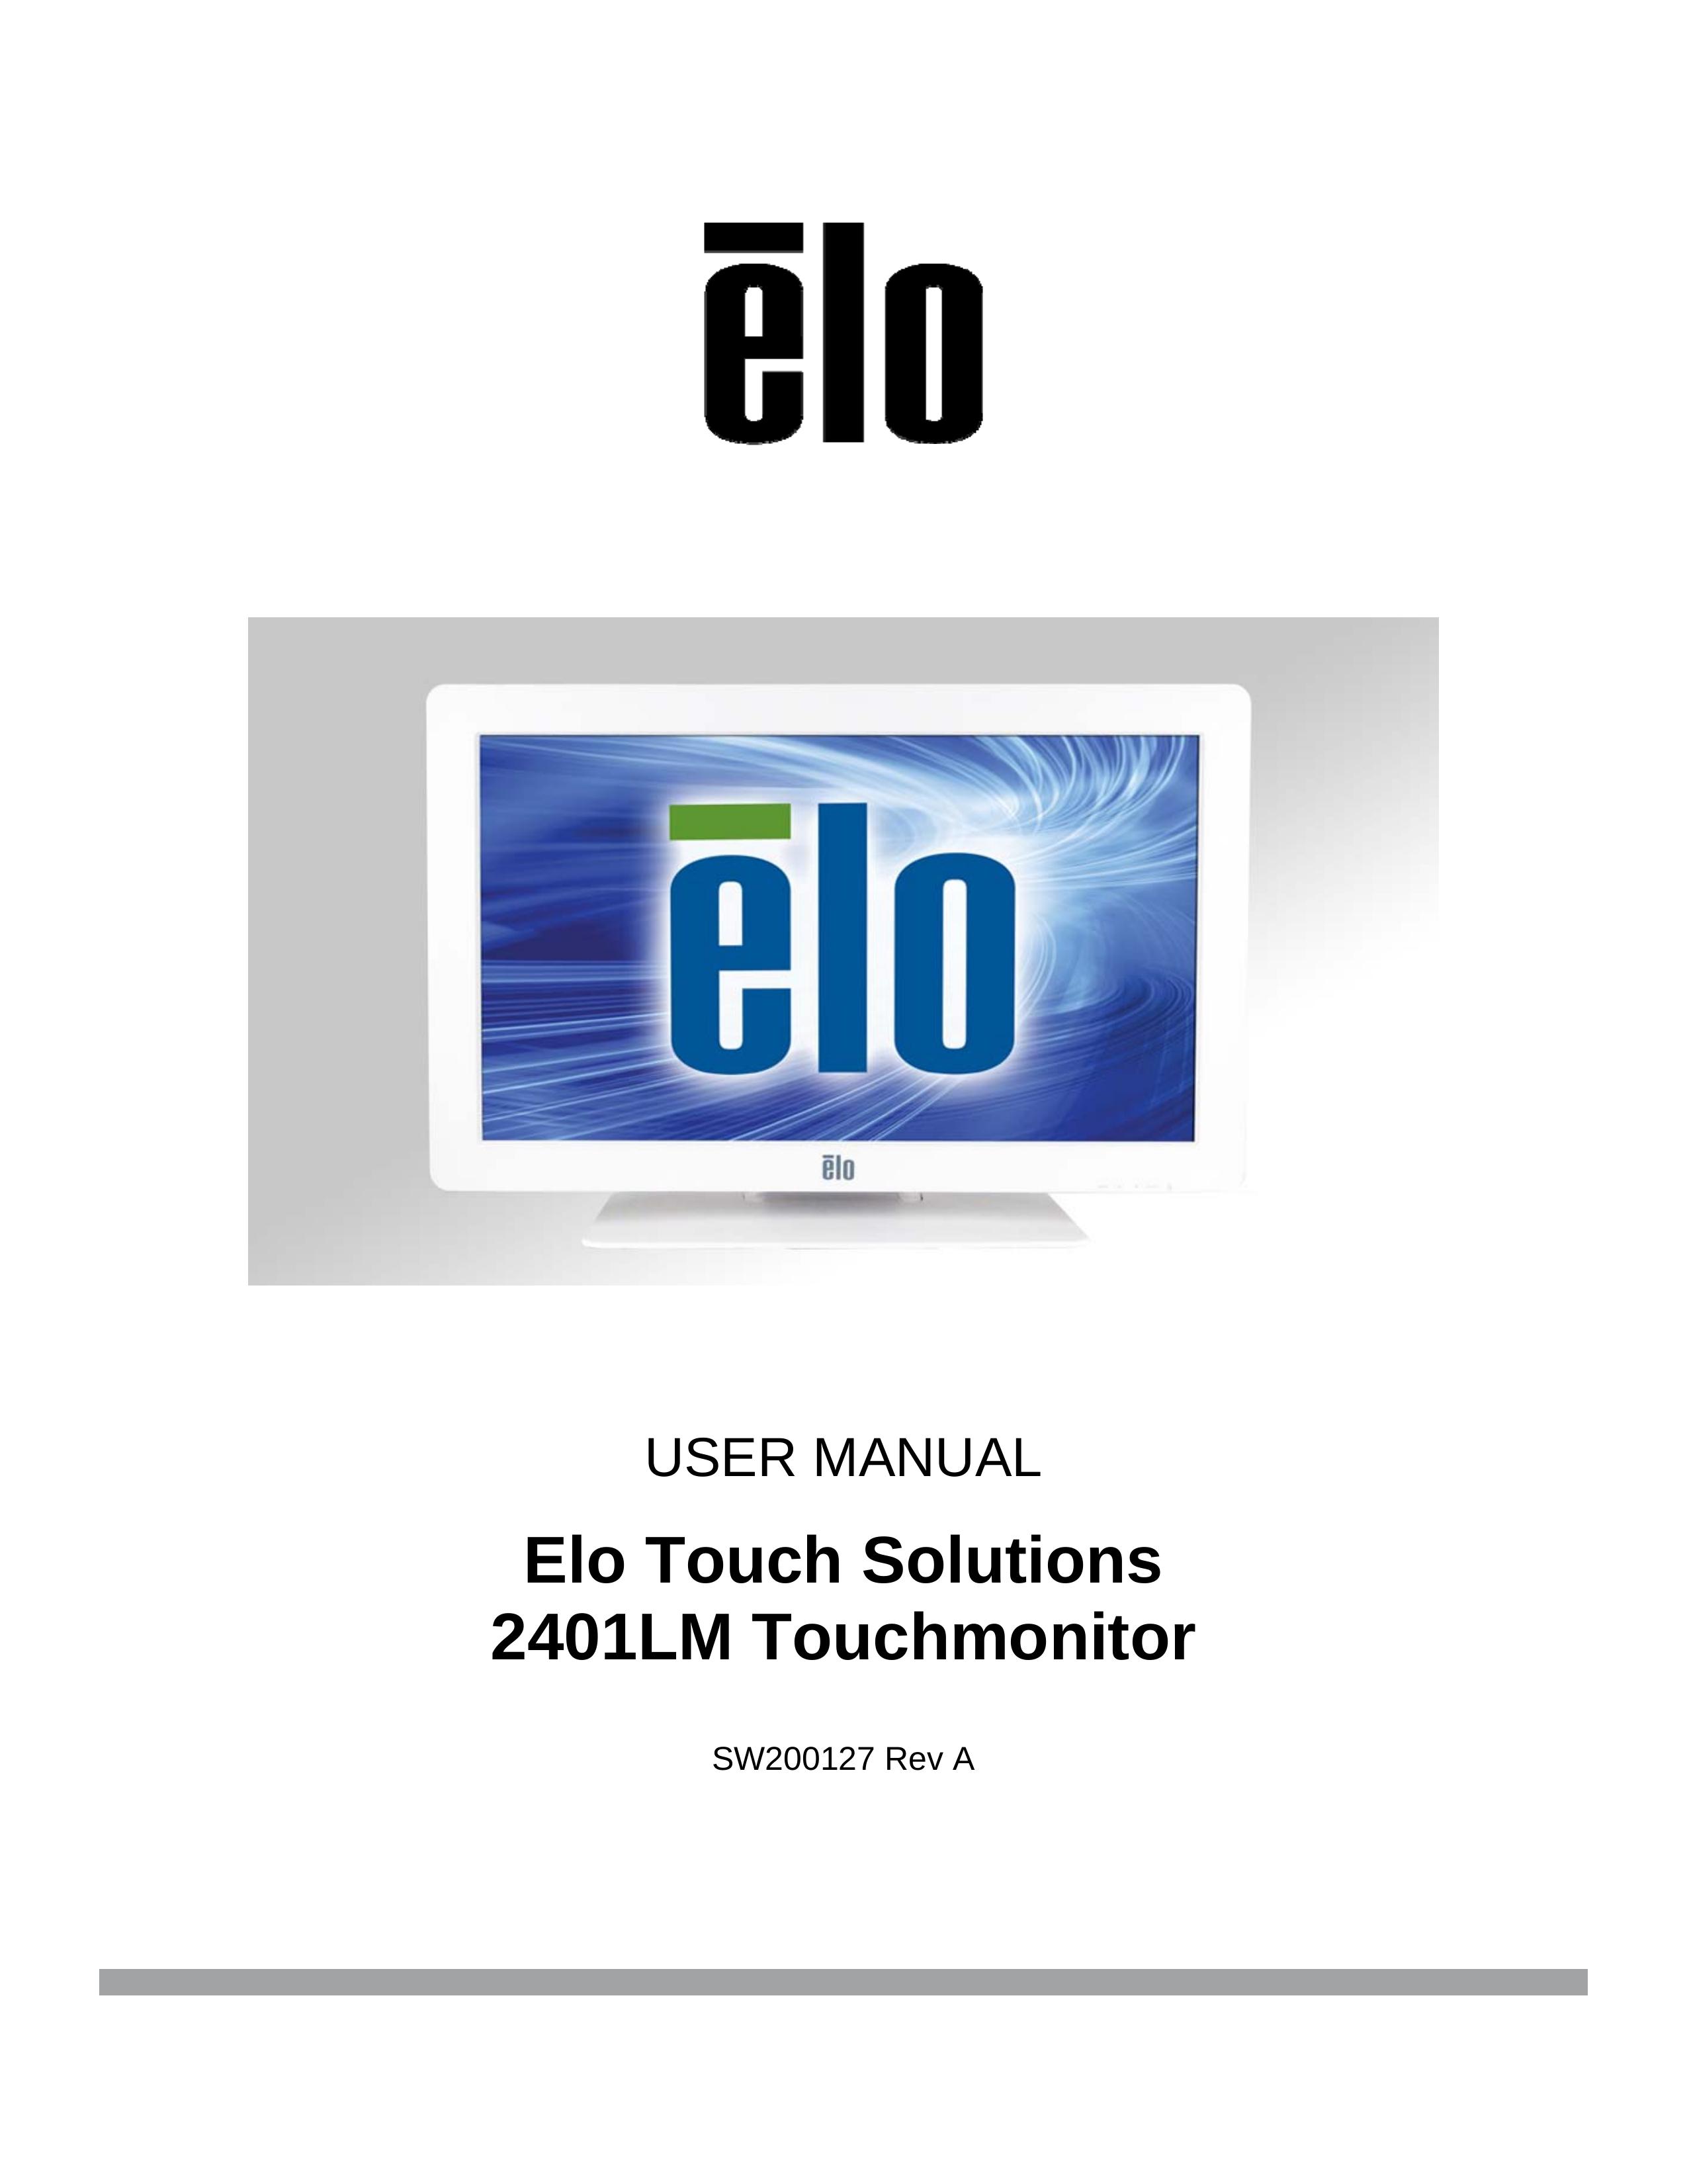 Elo TouchSystems 2401LM Blood Glucose Meter User Manual